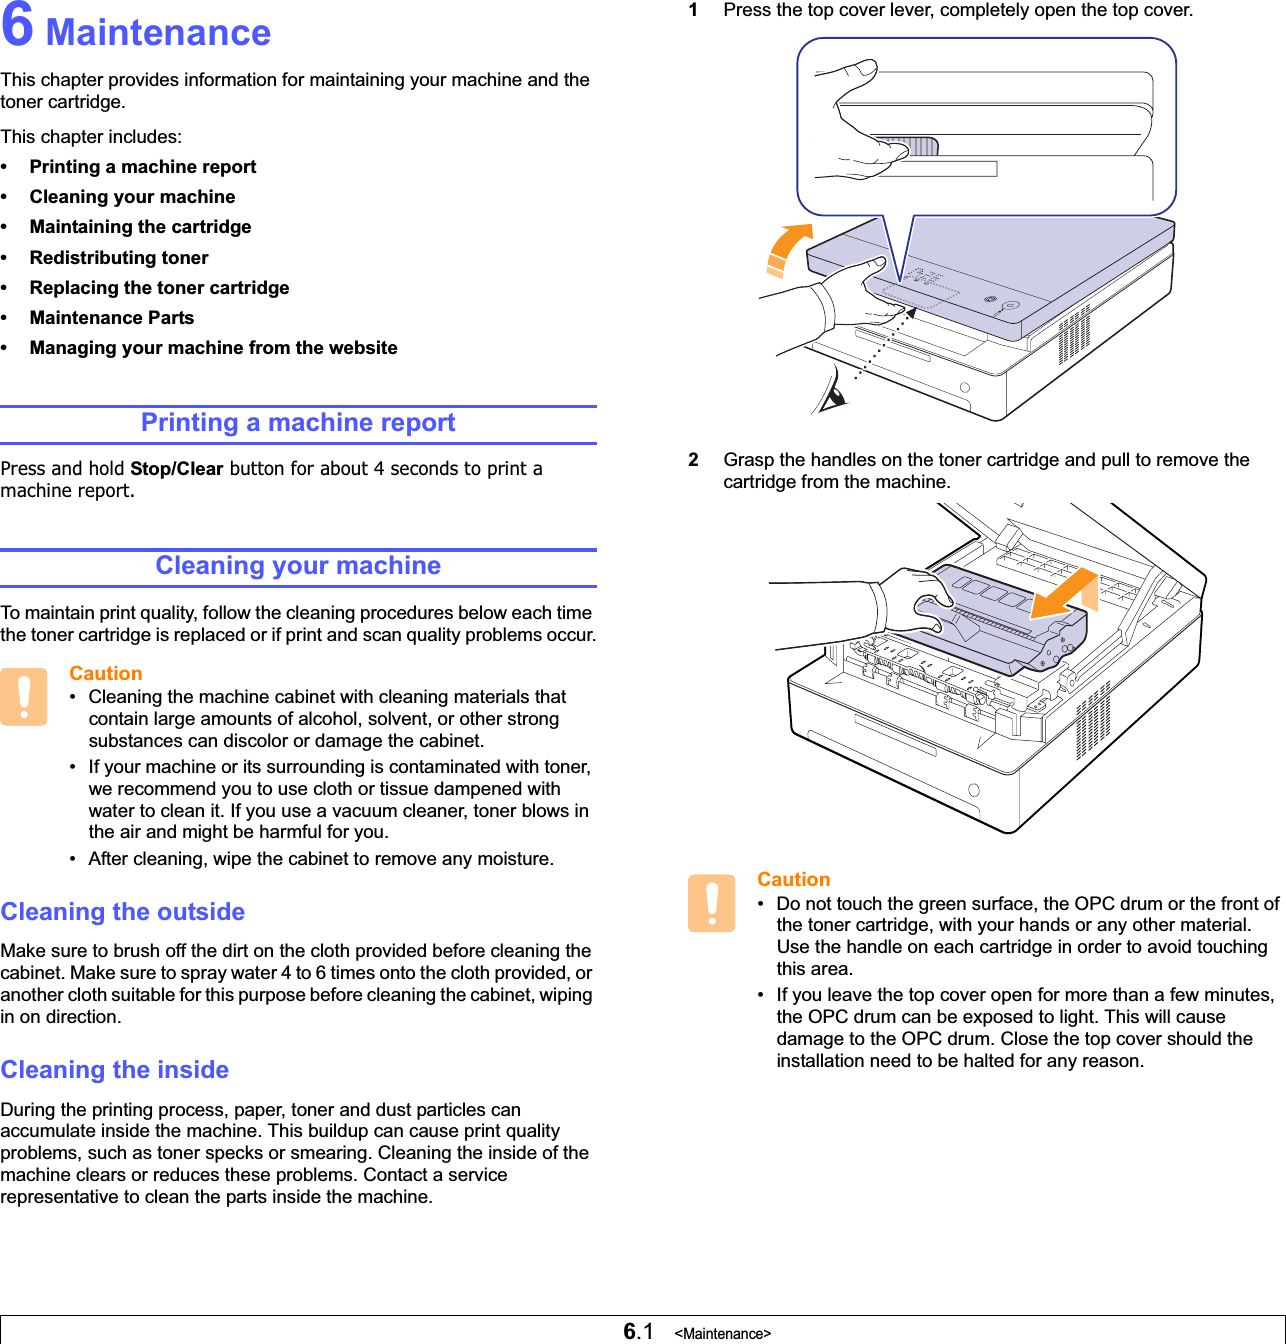 6.1   &lt;Maintenance&gt;6 MaintenanceThis chapter provides information for maintaining your machine and the toner cartridge.This chapter includes:• Printing a machine report• Cleaning your machine• Maintaining the cartridge• Redistributing toner• Replacing the toner cartridge• Maintenance Parts• Managing your machine from the websitePrinting a machine reportPress and hold Stop/Clear button for about 4 seconds to print a machine report.Cleaning your machineTo maintain print quality, follow the cleaning procedures below each time the toner cartridge is replaced or if print and scan quality problems occur.Caution• Cleaning the machine cabinet with cleaning materials that contain large amounts of alcohol, solvent, or other strong substances can discolor or damage the cabinet.• If your machine or its surrounding is contaminated with toner, we recommend you to use cloth or tissue dampened with water to clean it. If you use a vacuum cleaner, toner blows in the air and might be harmful for you. • After cleaning, wipe the cabinet to remove any moisture.Cleaning the outsideMake sure to brush off the dirt on the cloth provided before cleaning the cabinet. Make sure to spray water 4 to 6 times onto the cloth provided, or another cloth suitable for this purpose before cleaning the cabinet, wiping in on direction. Cleaning the insideDuring the printing process, paper, toner and dust particles can accumulate inside the machine. This buildup can cause print quality problems, such as toner specks or smearing. Cleaning the inside of the machine clears or reduces these problems. Contact a service representative to clean the parts inside the machine.1Press the top cover lever, completely open the top cover.   2Grasp the handles on the toner cartridge and pull to remove the cartridge from the machine.    Caution• Do not touch the green surface, the OPC drum or the front of the toner cartridge, with your hands or any other material. Use the handle on each cartridge in order to avoid touching this area.• If you leave the top cover open for more than a few minutes, the OPC drum can be exposed to light. This will cause damage to the OPC drum. Close the top cover should the installation need to be halted for any reason.